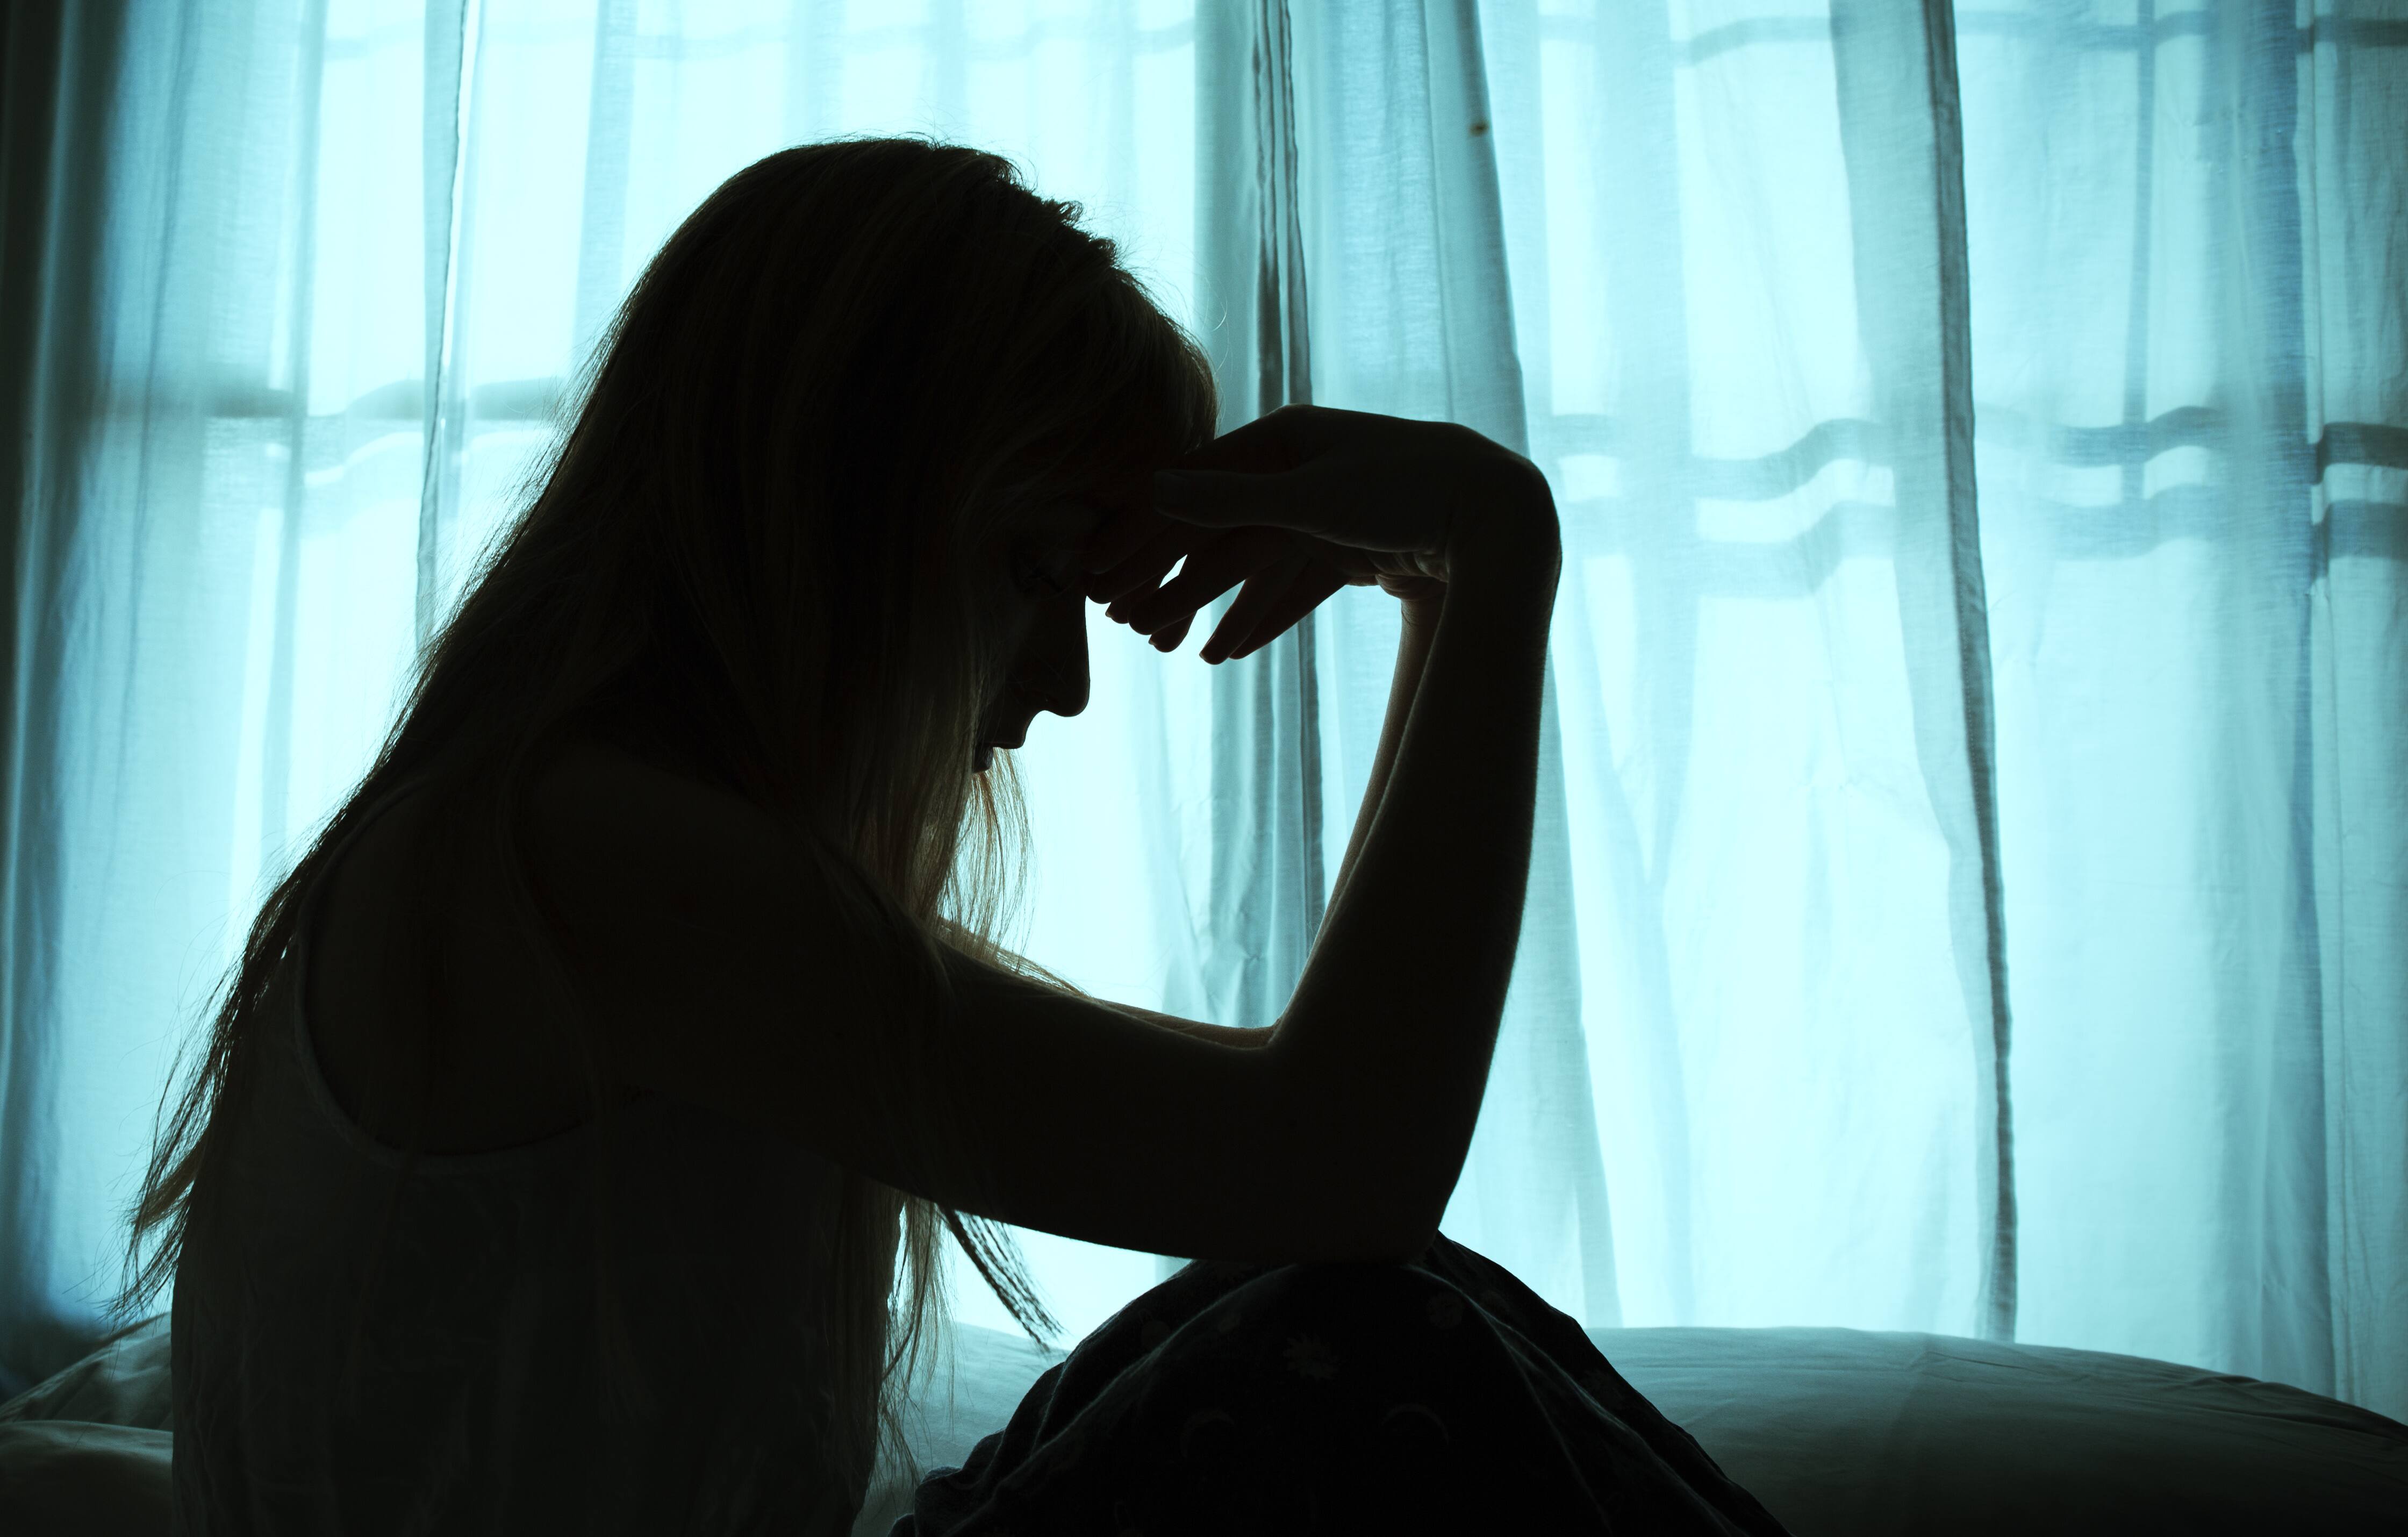 Depression May be Linked with Changing Brain Structures